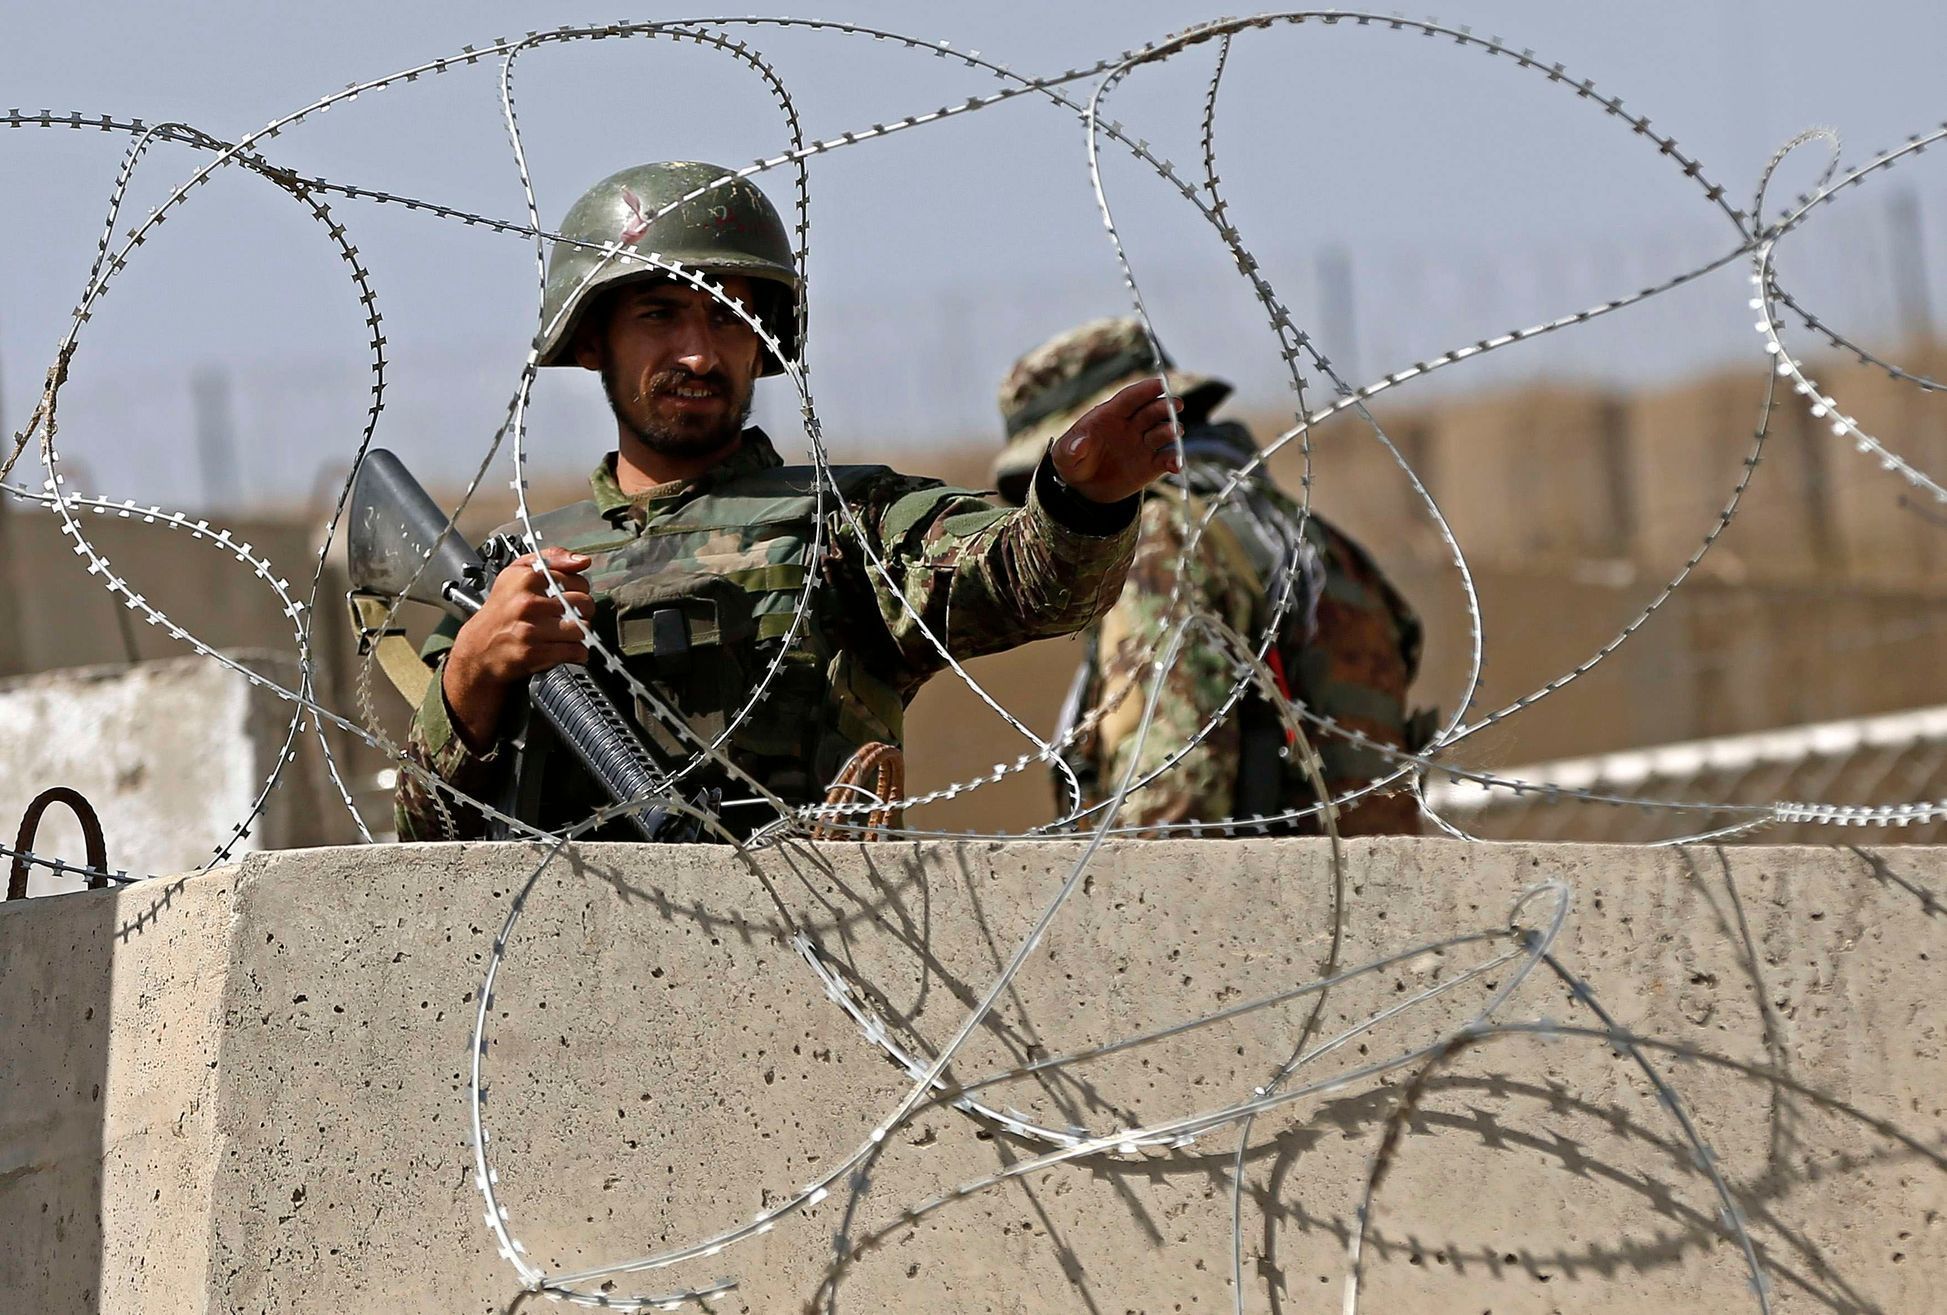 Afghan National Army soldier keeps watch at gate of a British-run military training academy Camp Qargha, in Kabul